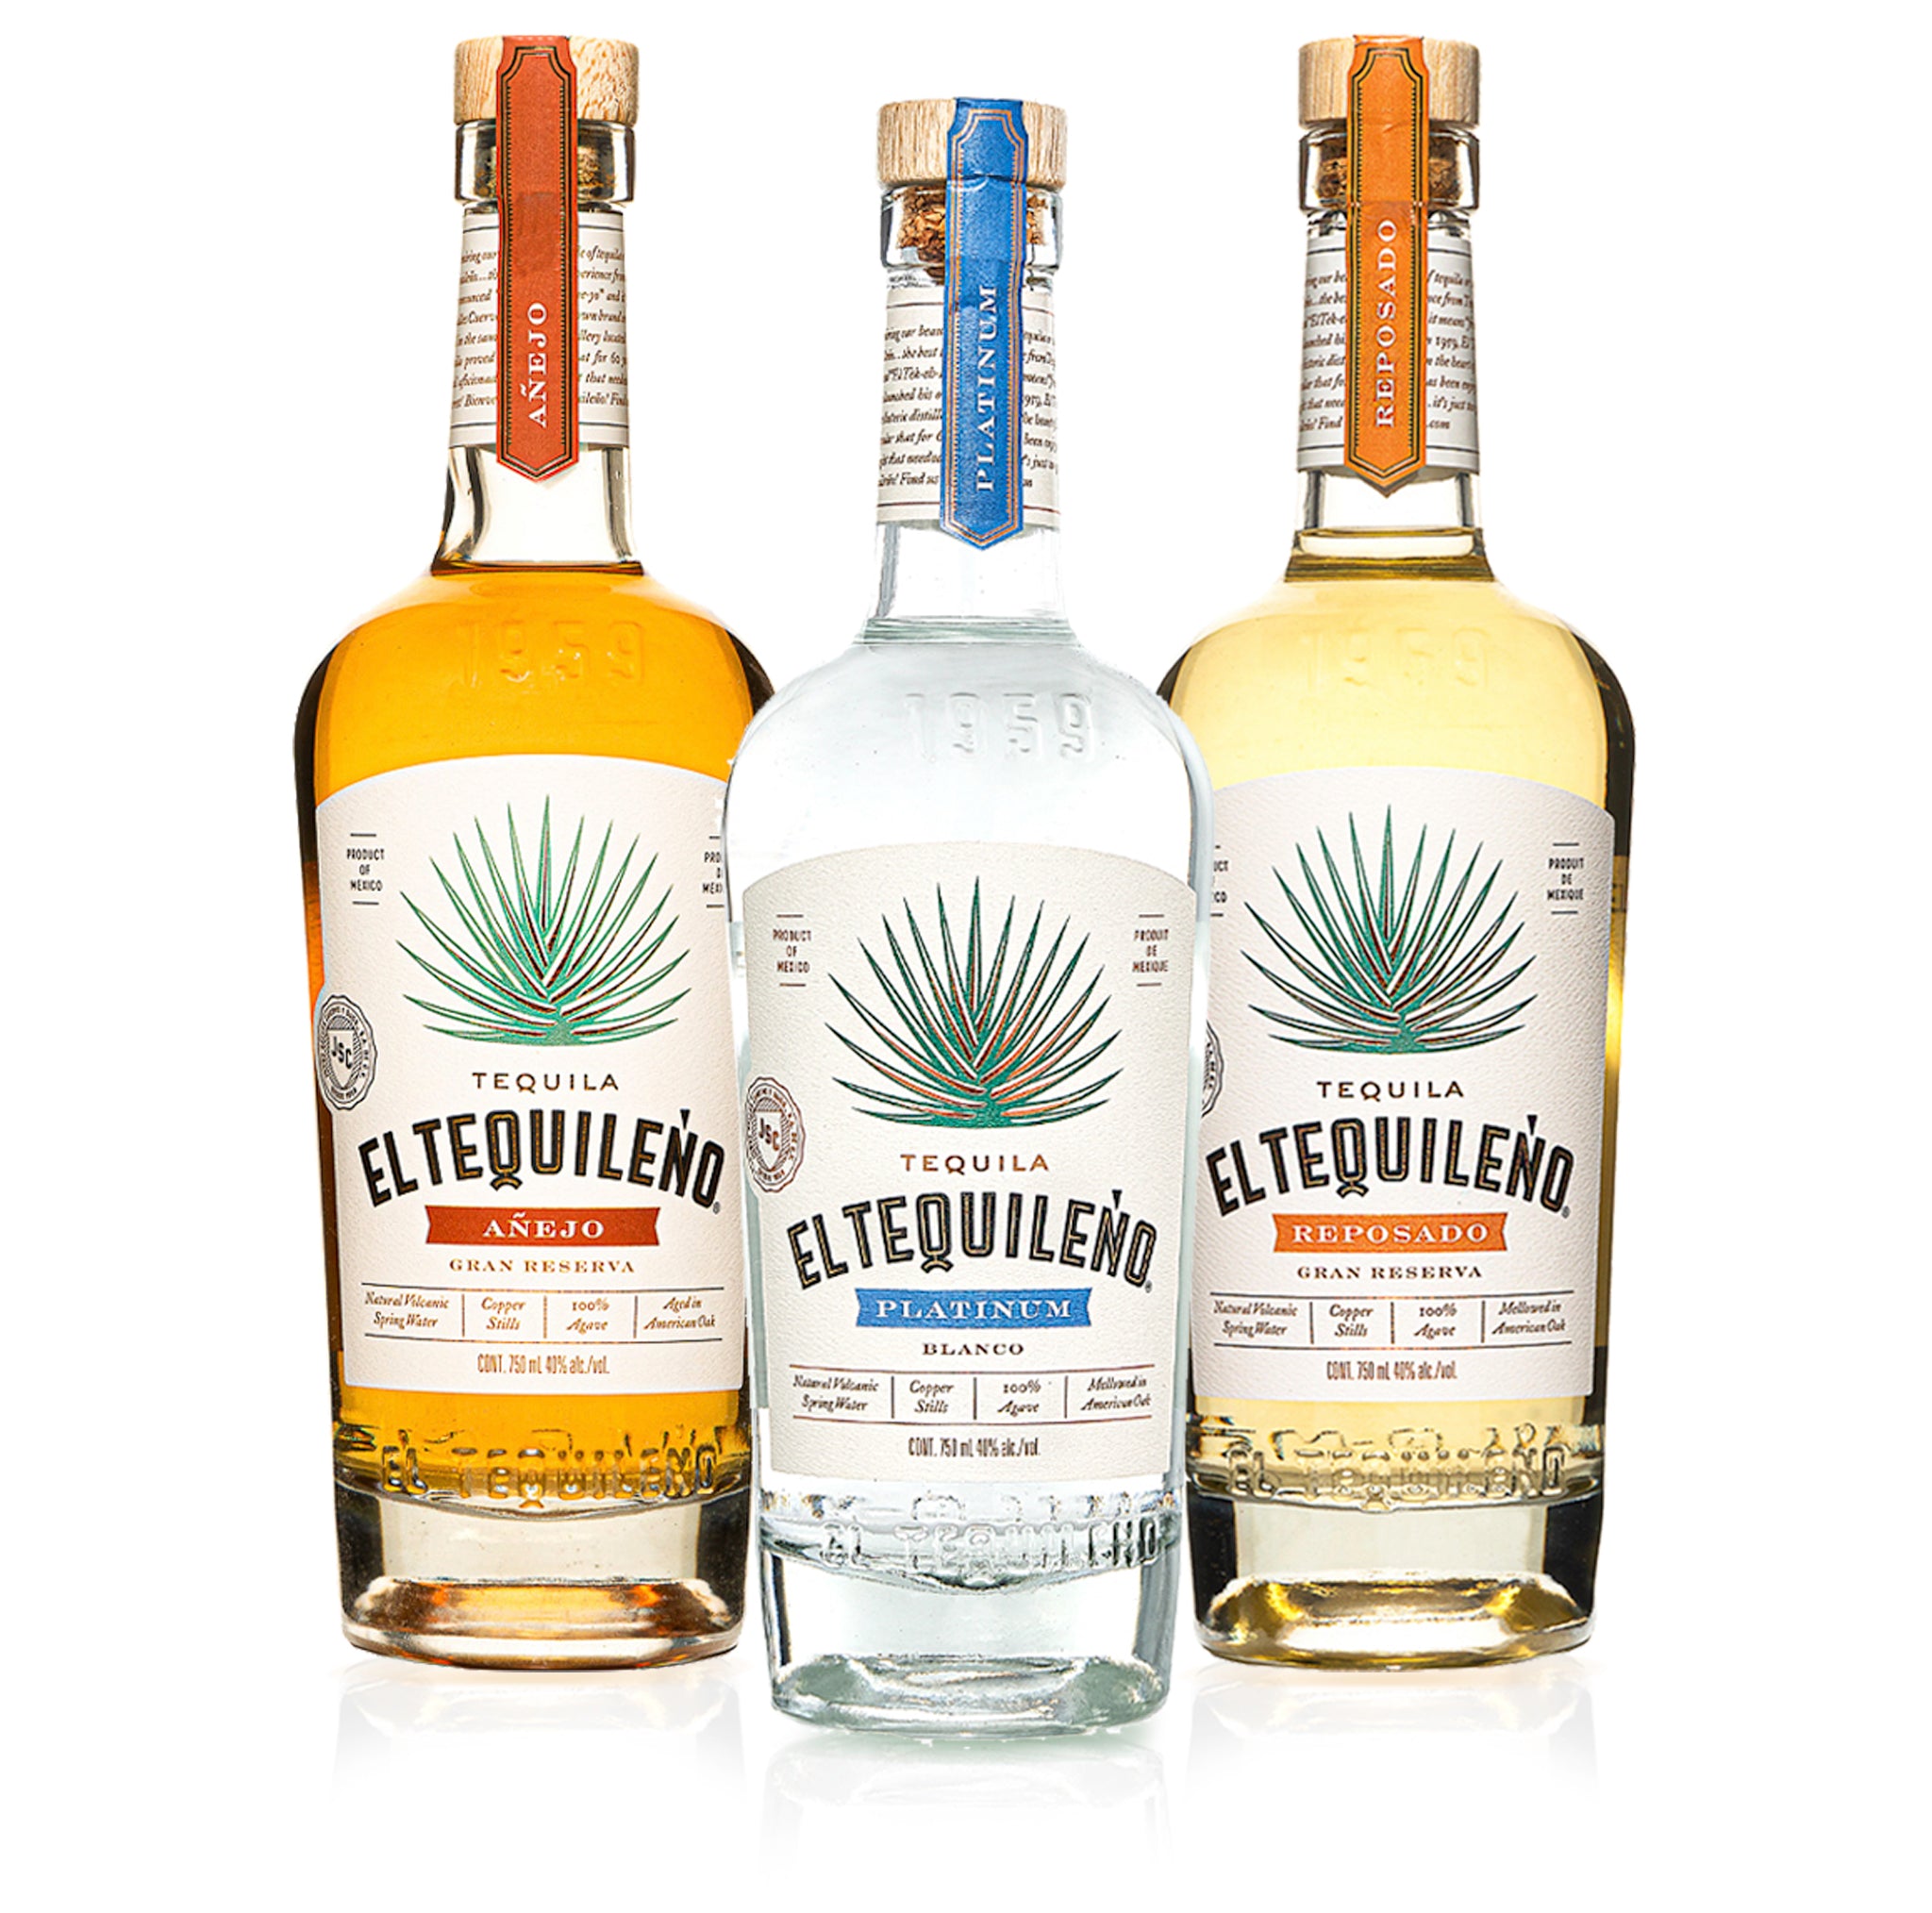 El Tequileno Family Collection